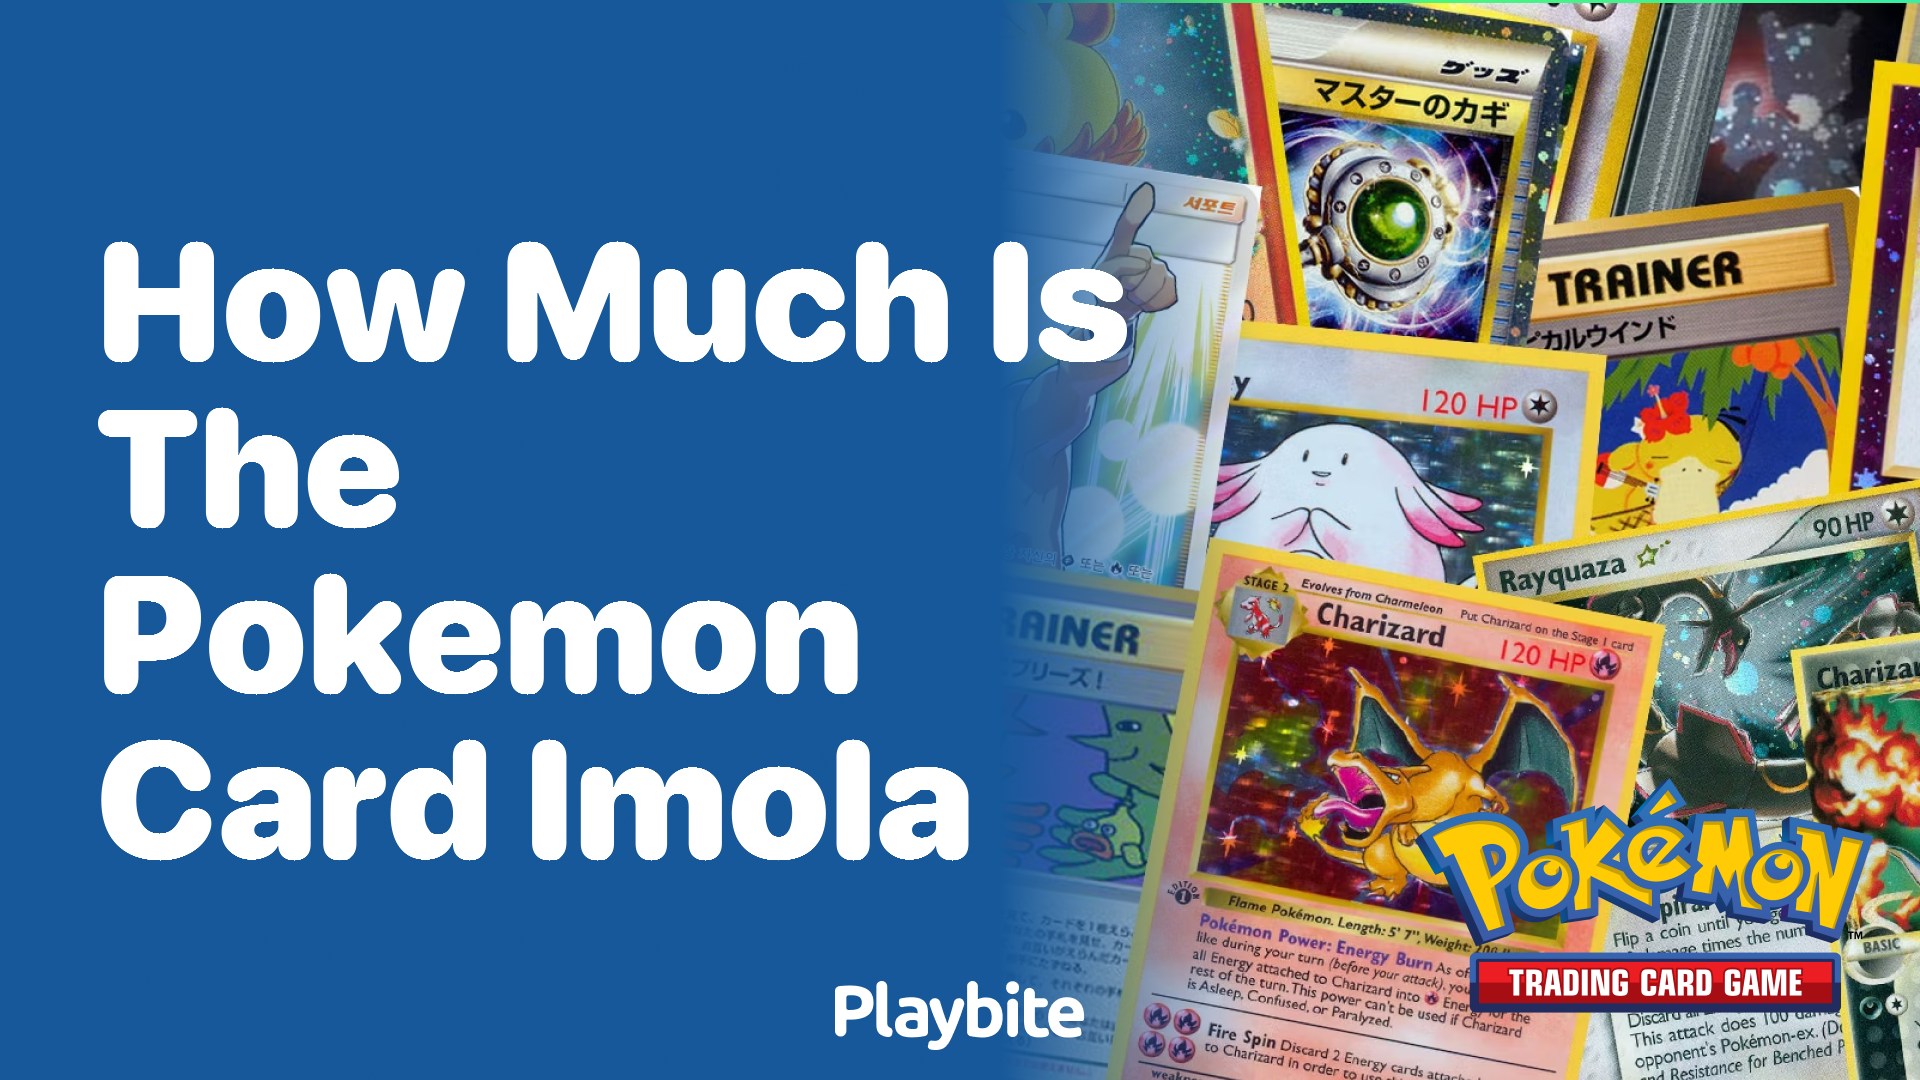 How much is the Pokemon card Imola?